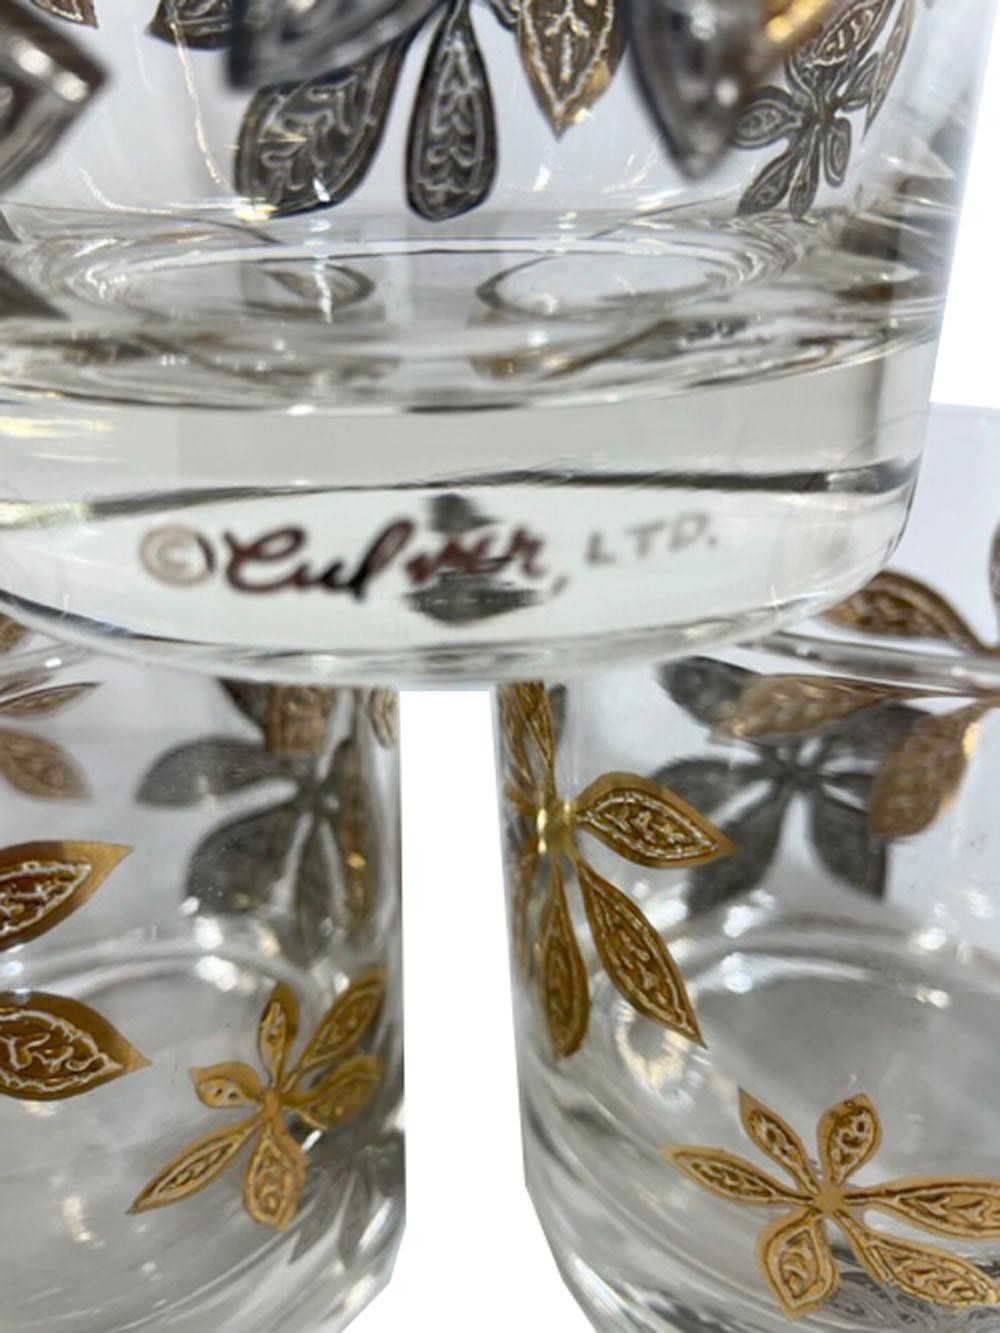 Mid-Century Modern Rocks Glasses by Culver, LTD. with Leaves in Gold and Silver In Good Condition For Sale In Nantucket, MA